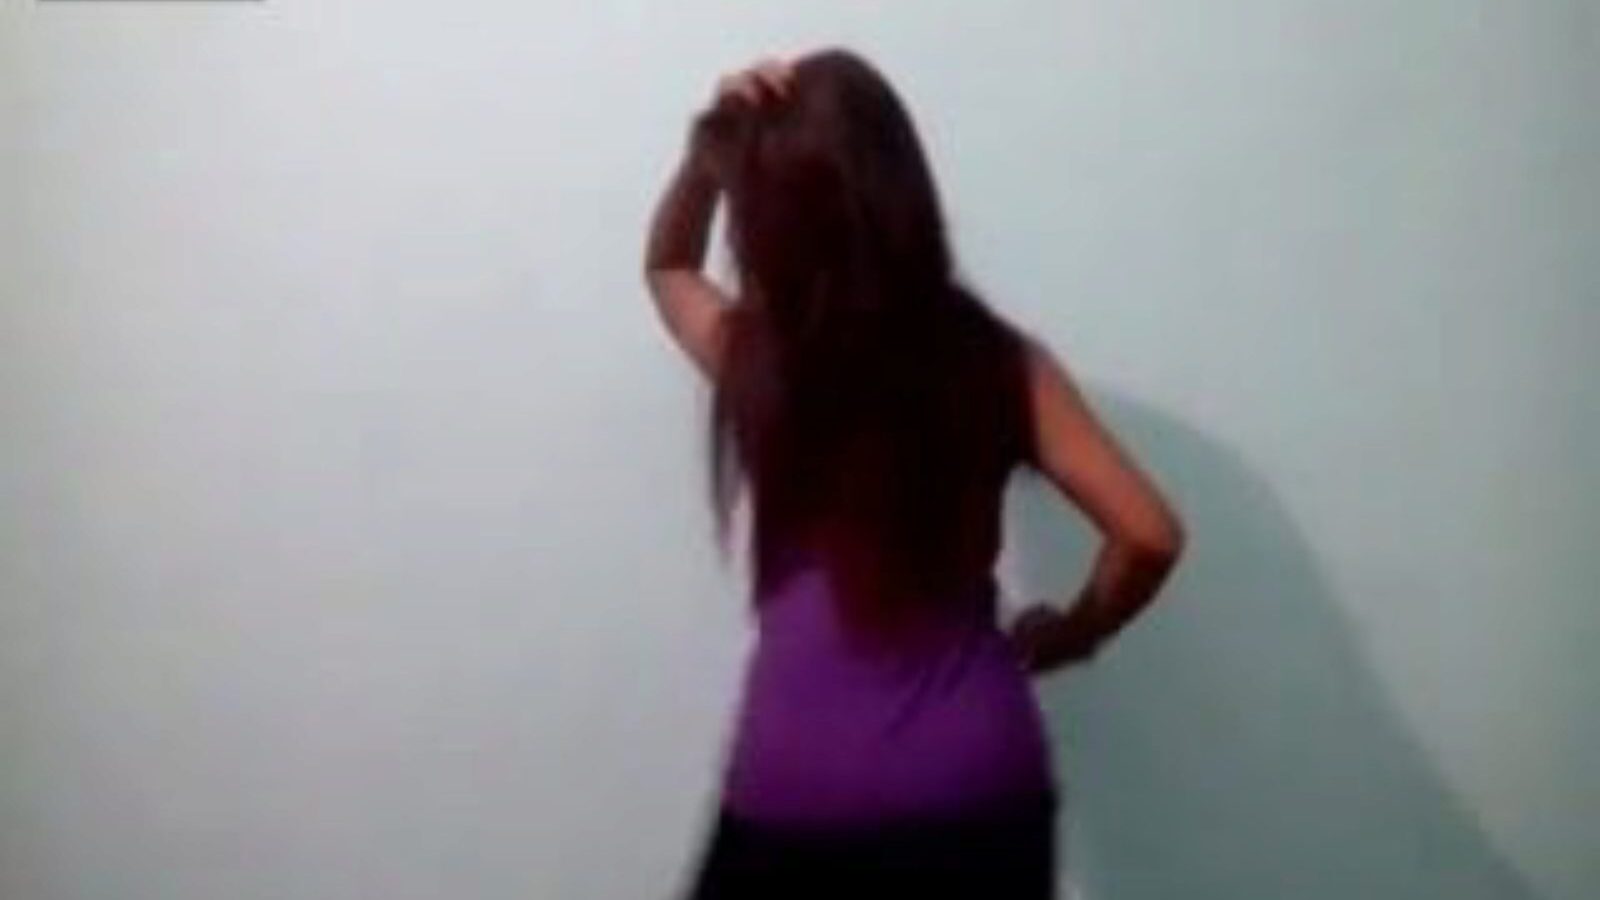 telugu lover andhra nude dance, free indian porn video a4 watch telugu lover andhra nude dance video on xhamster, superlativ good fuck-a-thon tube site with tonnes of free-for-all indian american dad nude & malayalam porno clips